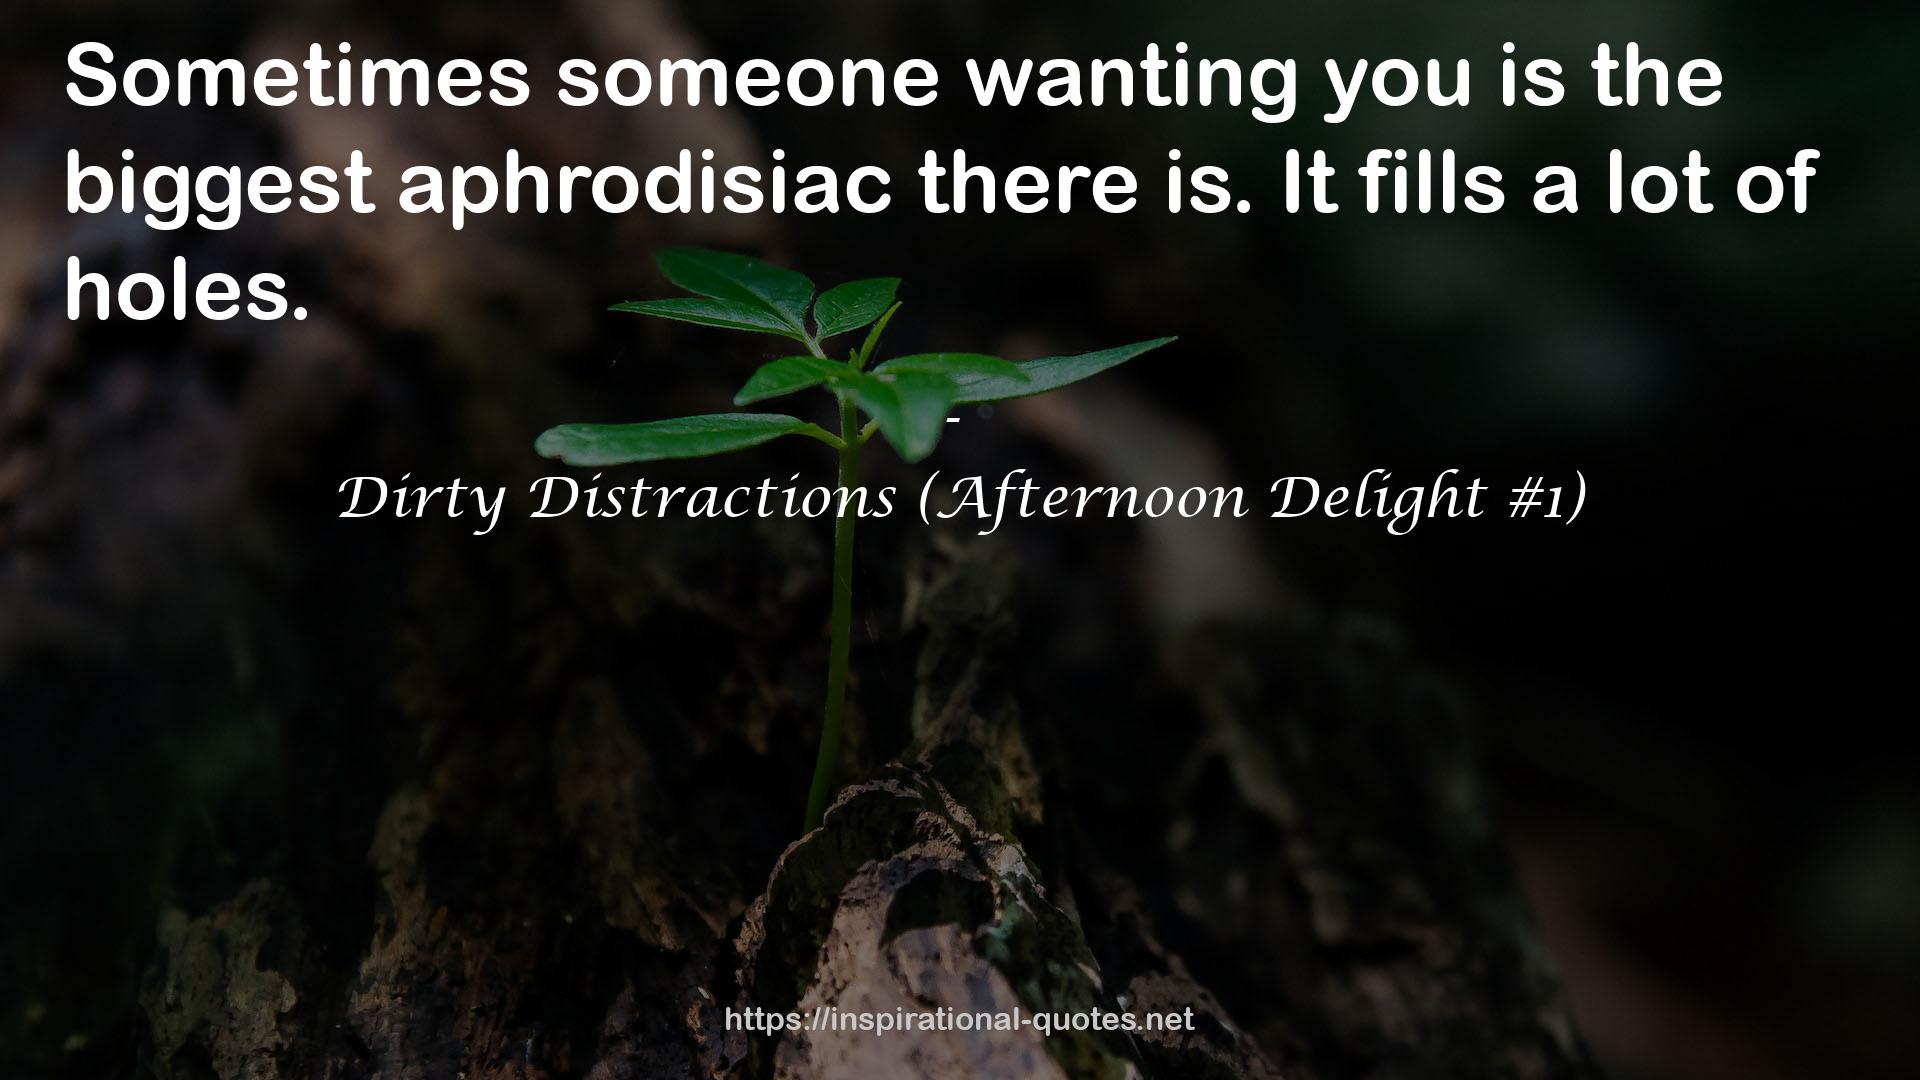 Dirty Distractions (Afternoon Delight #1) QUOTES